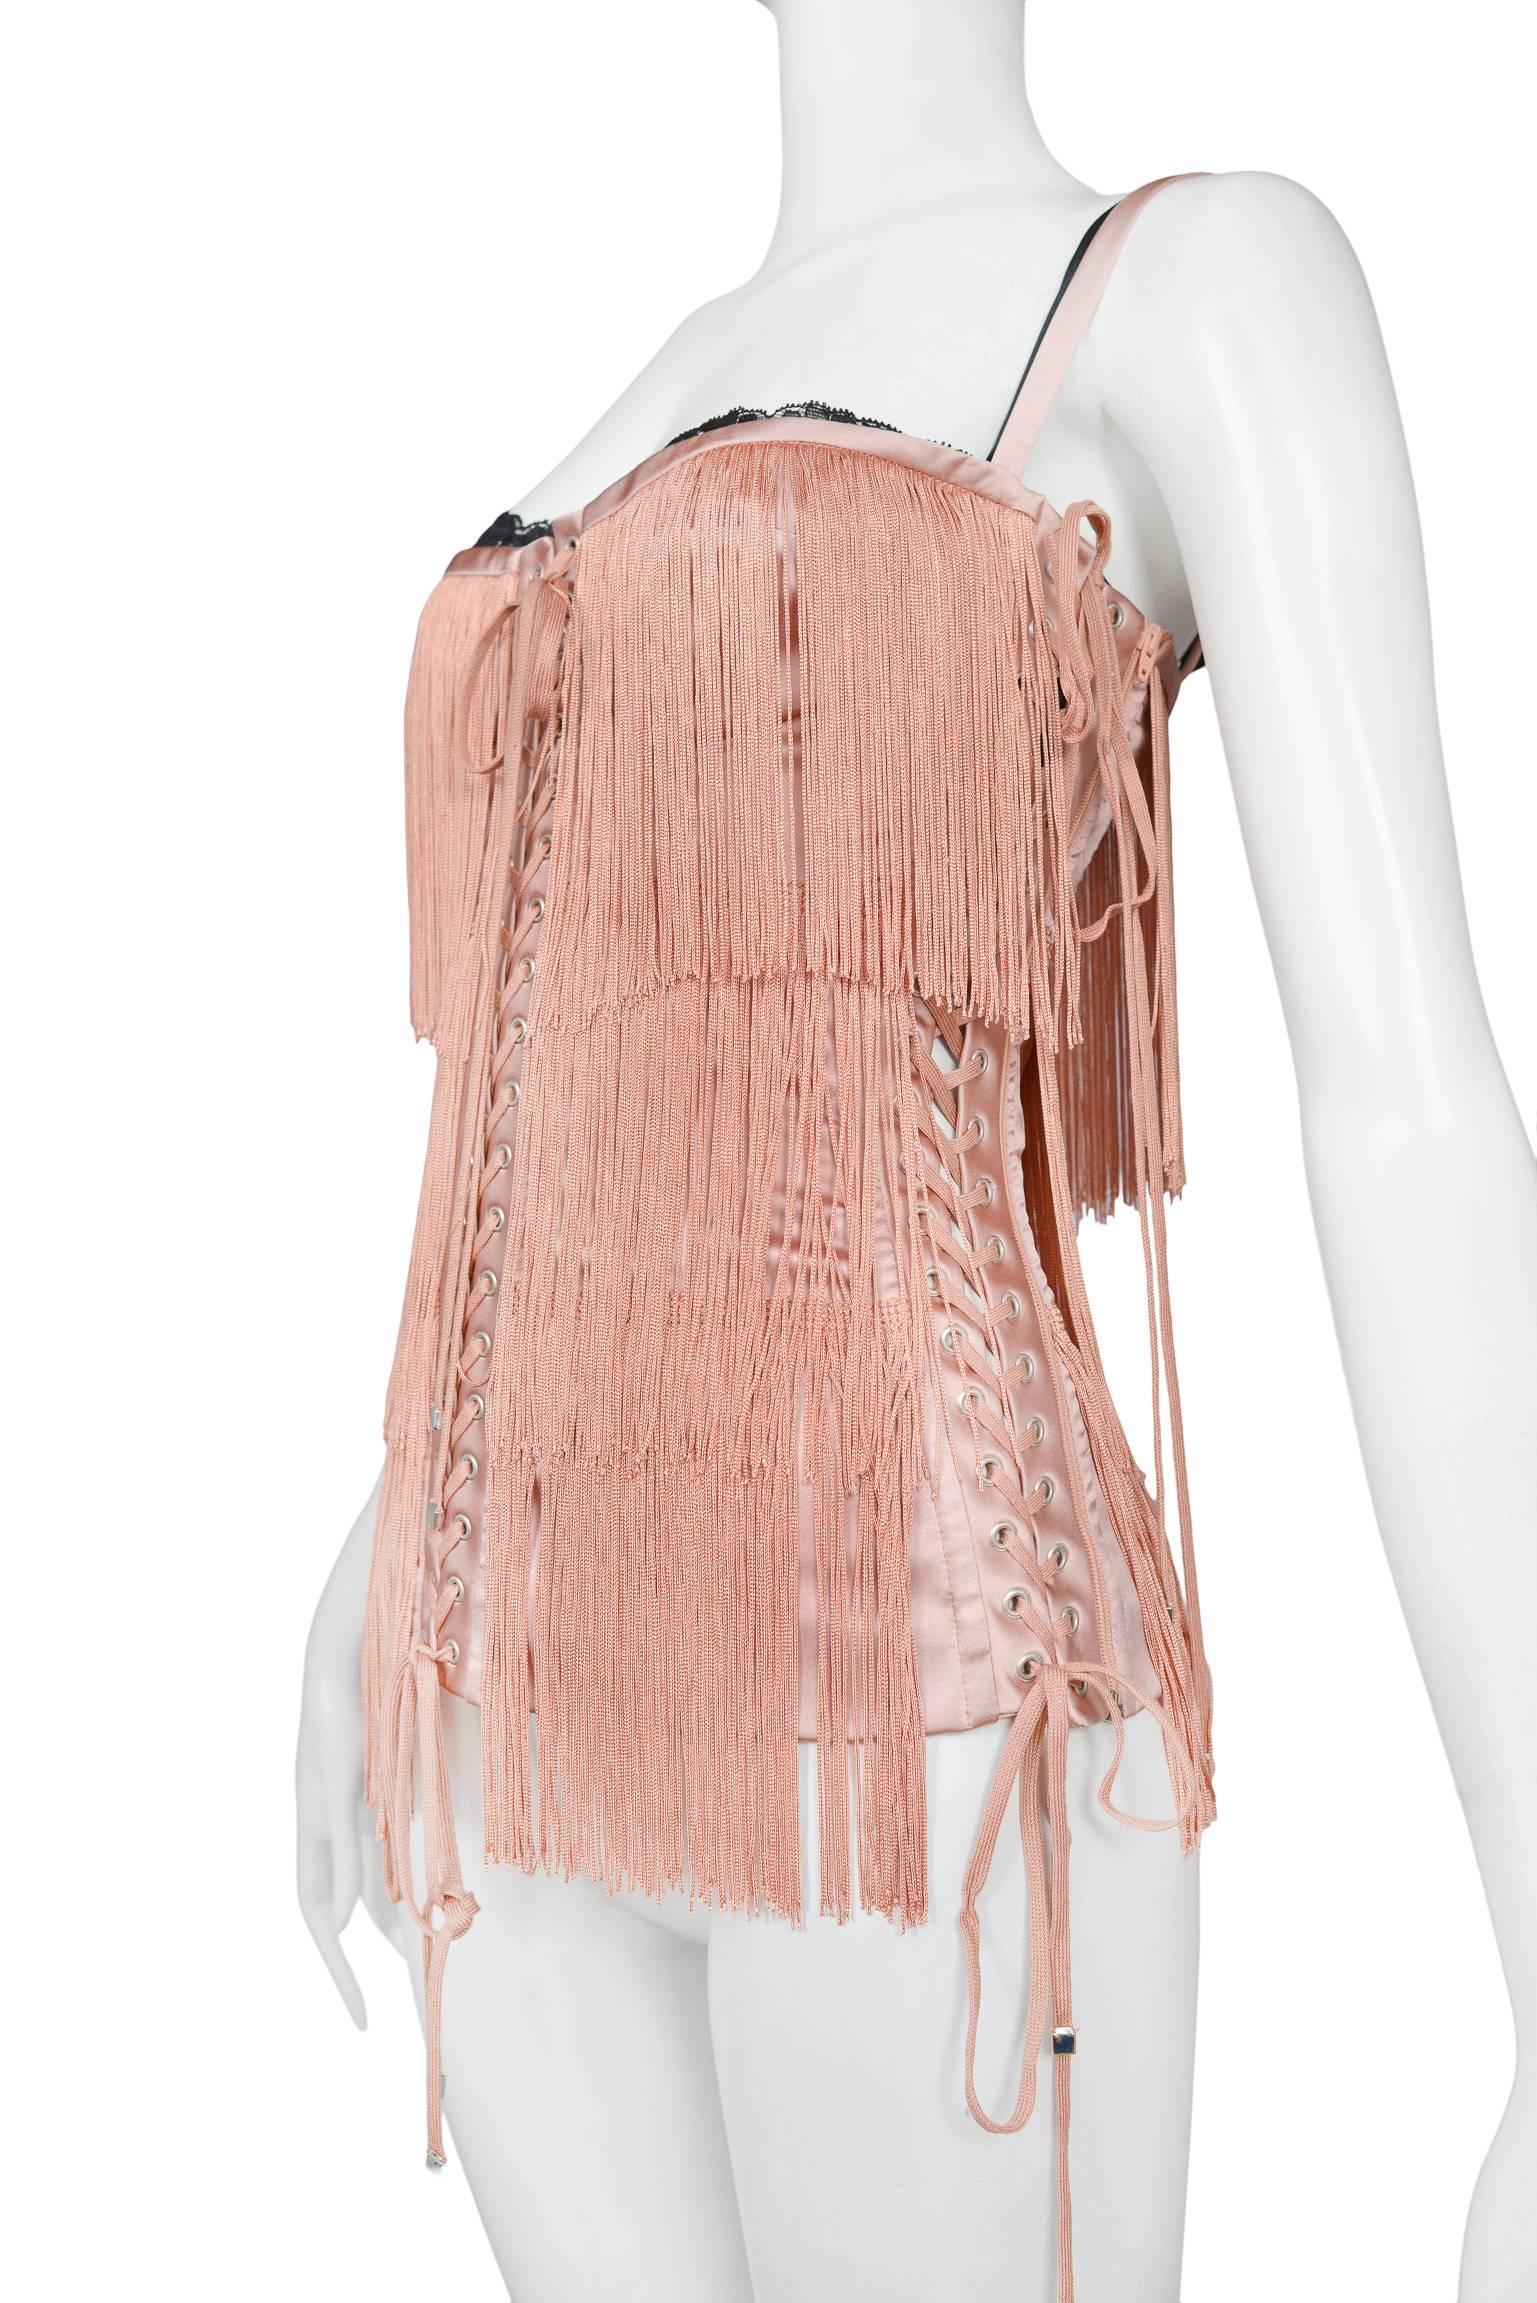 Dolce & Gabbana pink blush heavy fringe corset bustier top with pink and black straps, and black lace trim. Corset bands feature pink satin and the pink laces are finished with silver tone caps at the end of each lace. Collection 2003 and featured